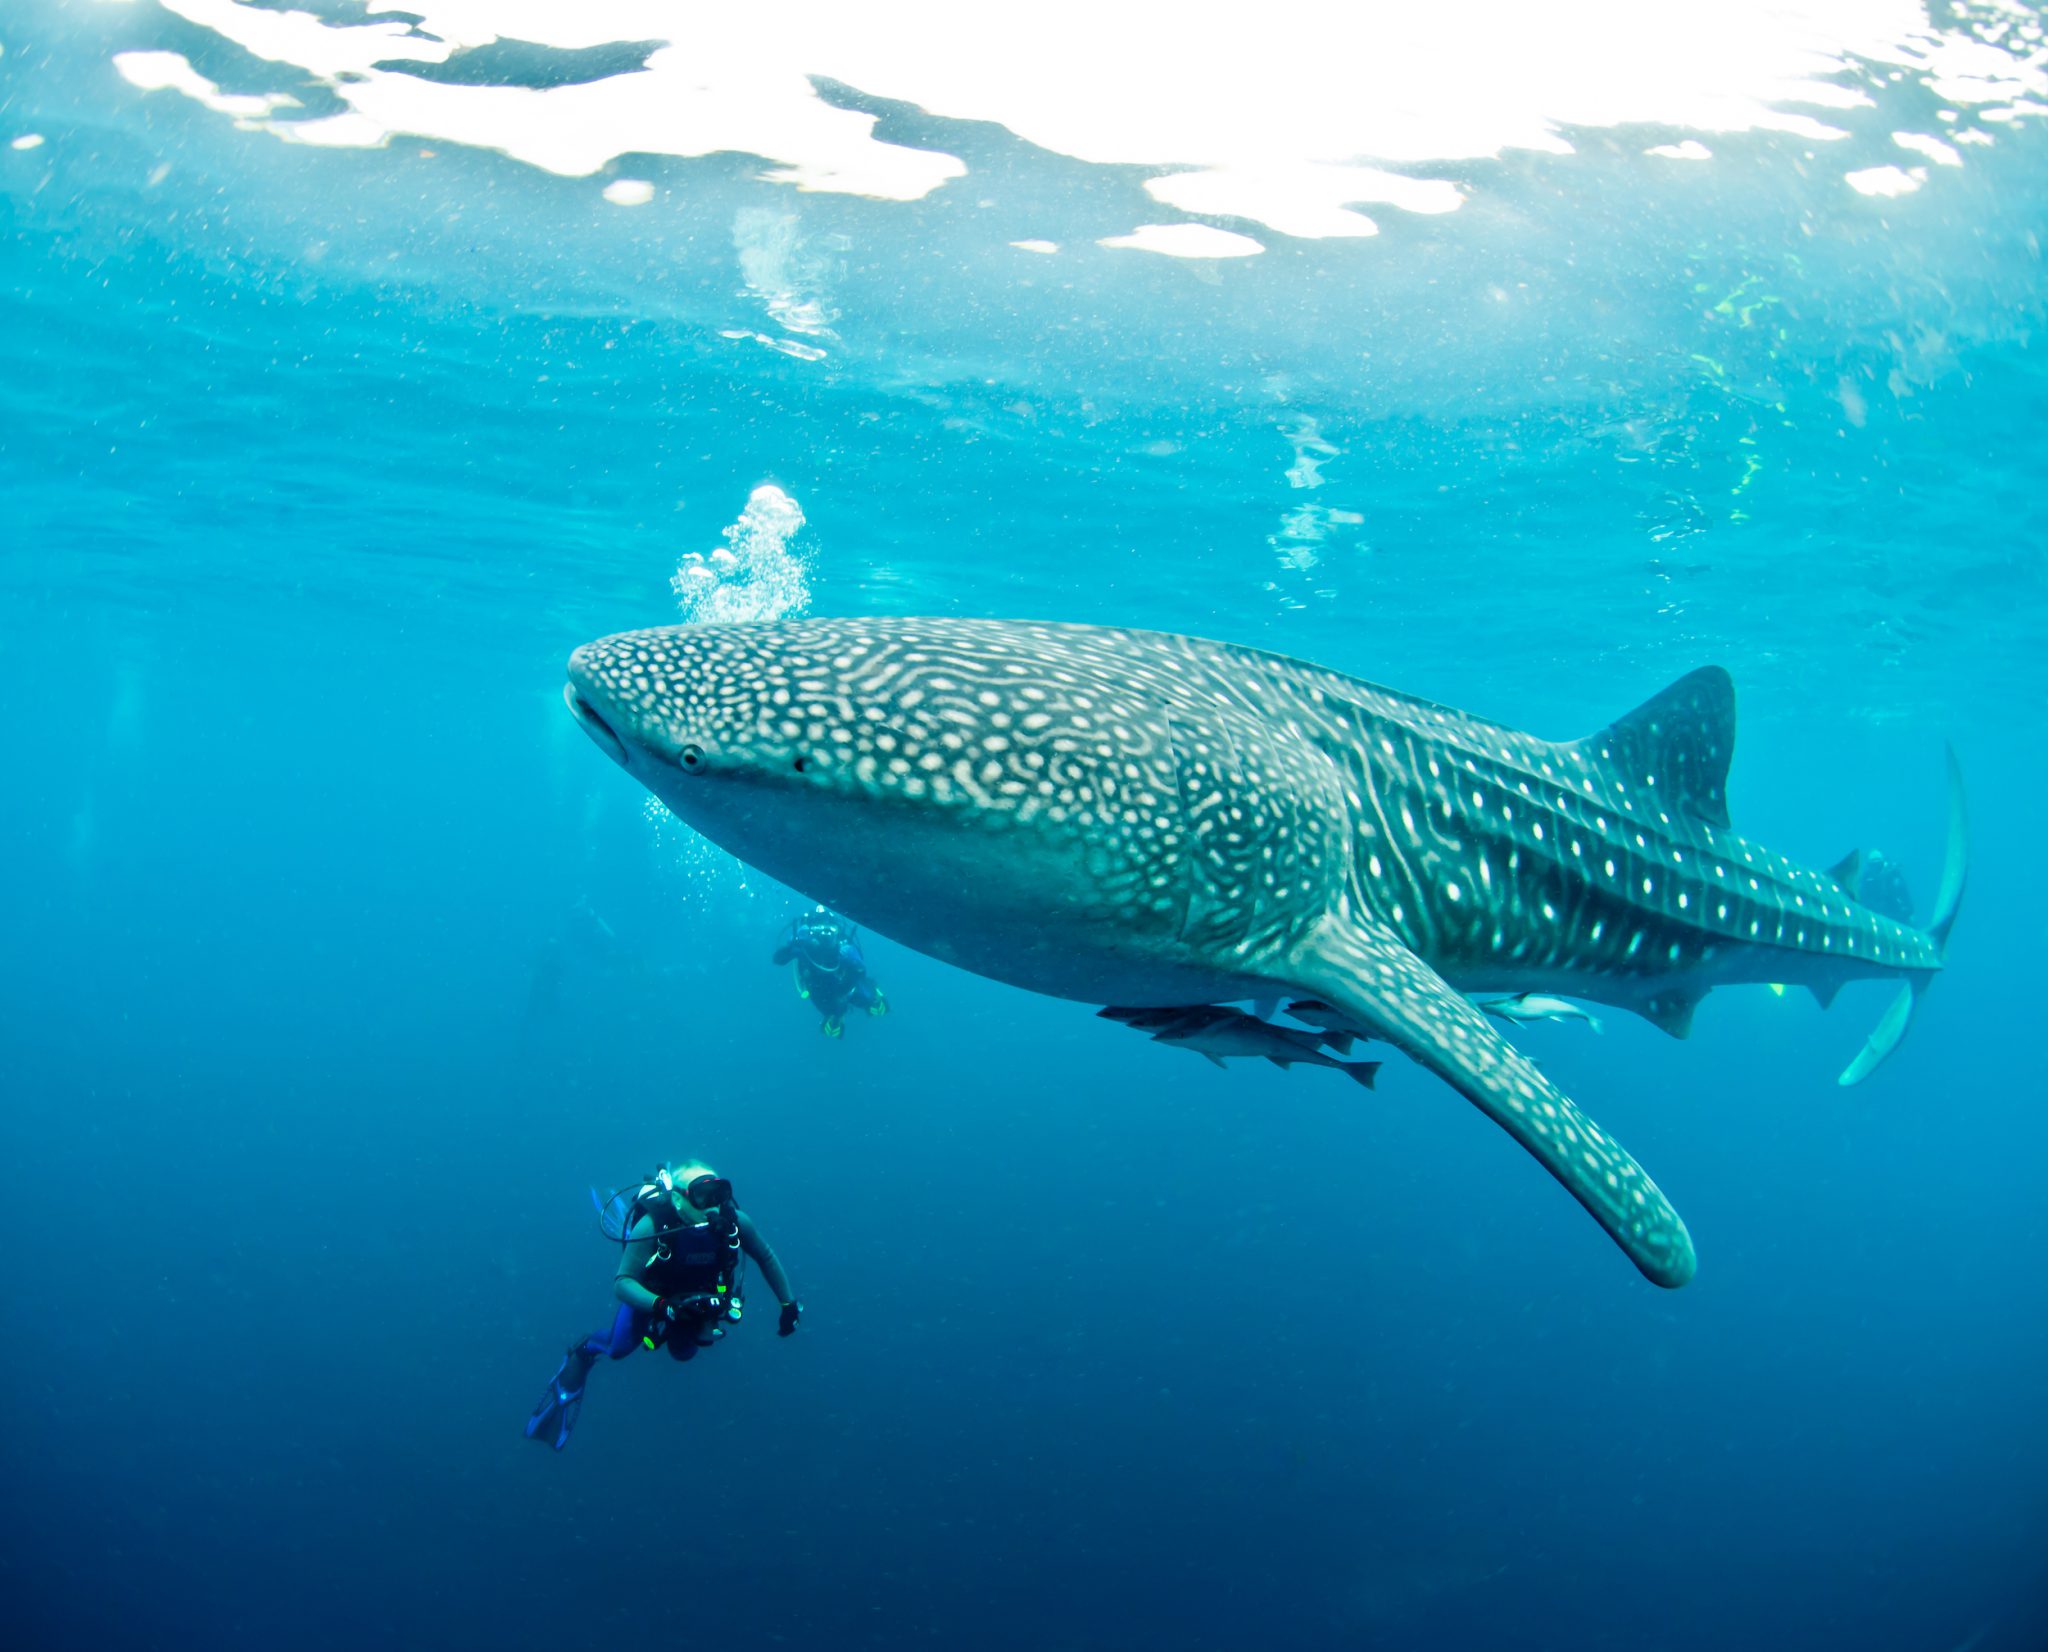 Two scuba divers with a whale shark, which is one of the highlights of scuba diving travel across the world